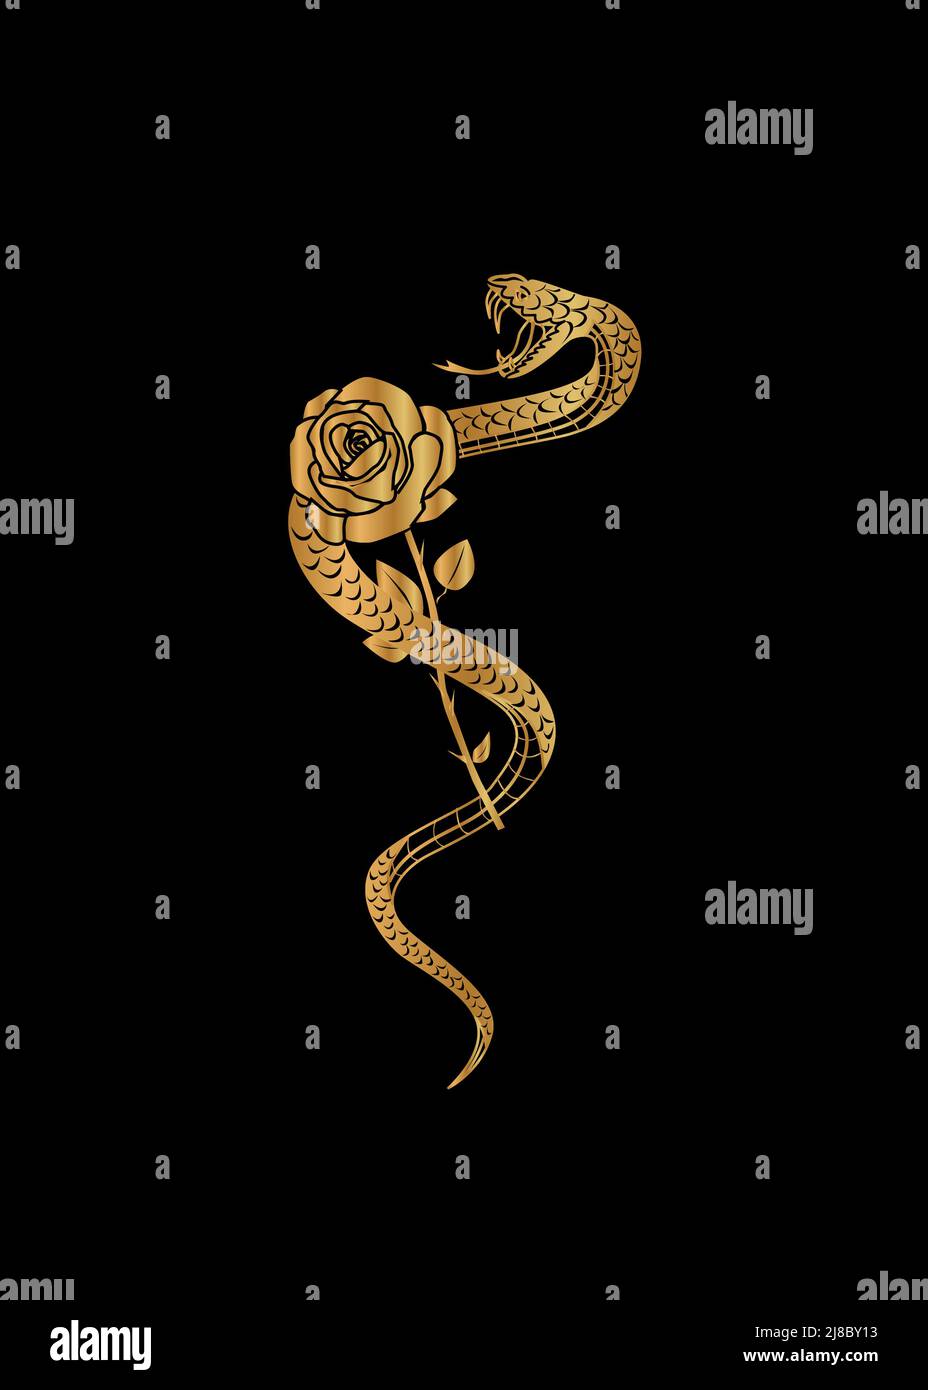 Beautiful illustration on the theme of animals with a beautiful snake and rose. Stock Vector